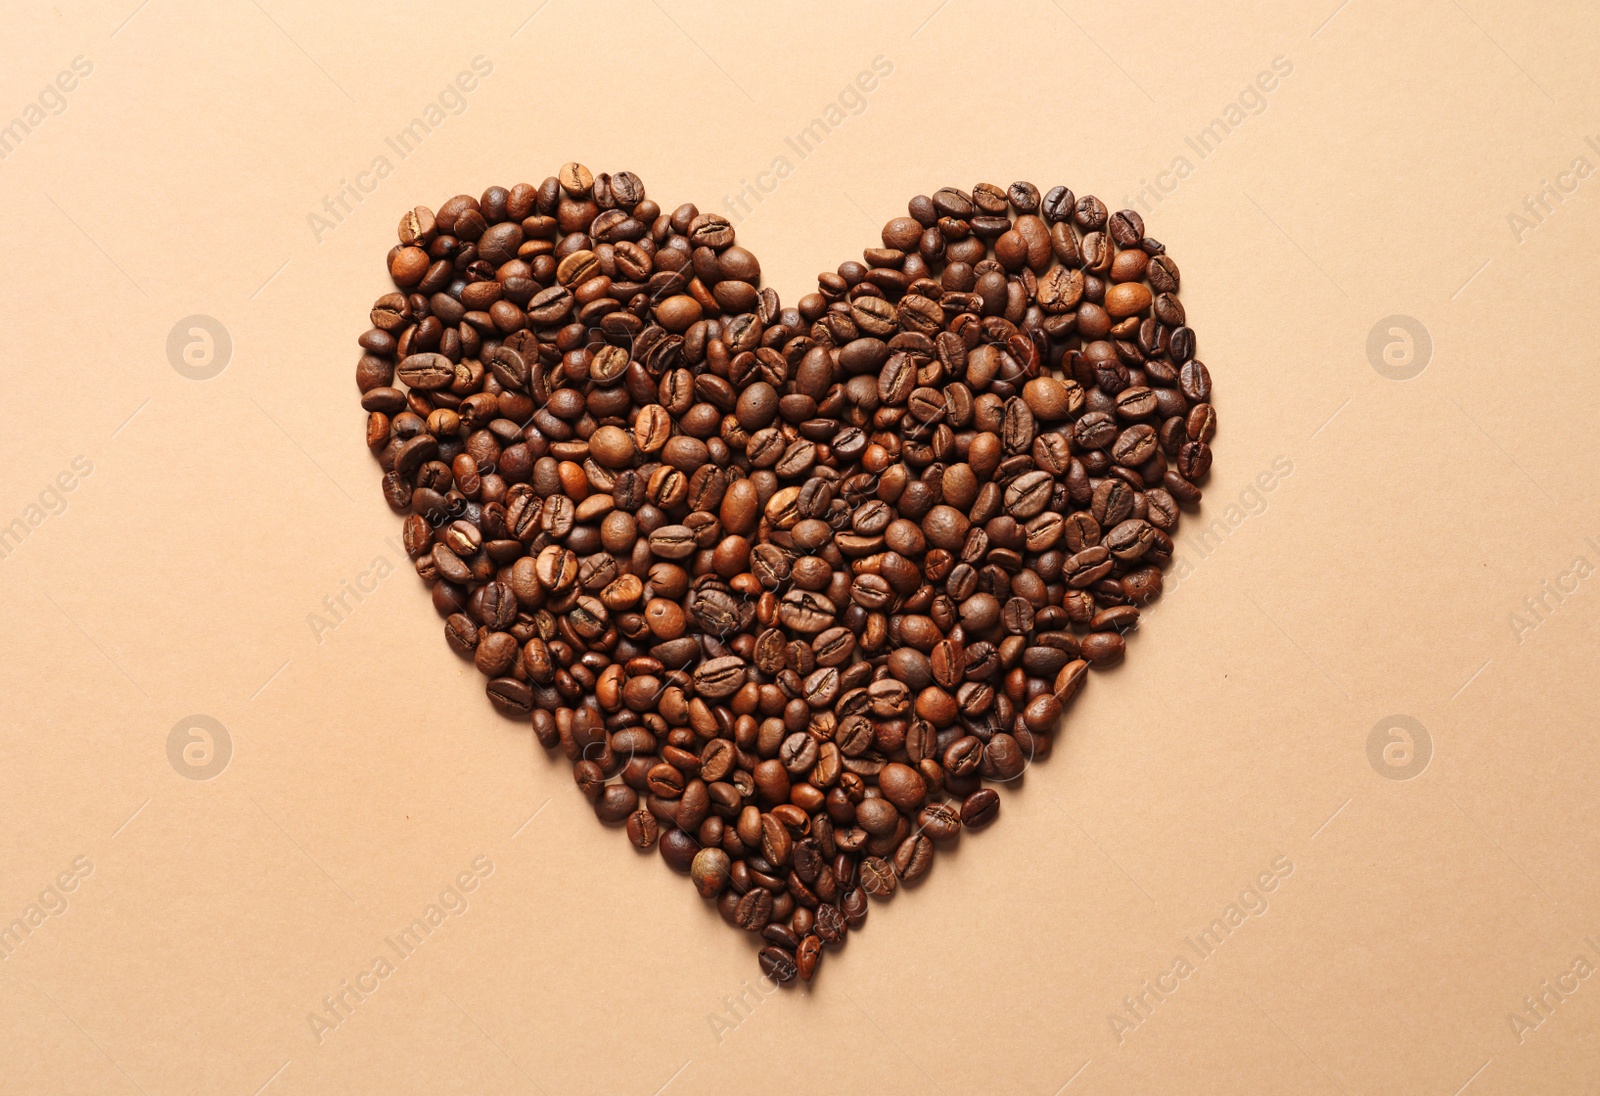 Photo of Heart shaped pile of coffee beans on light orange background, top view